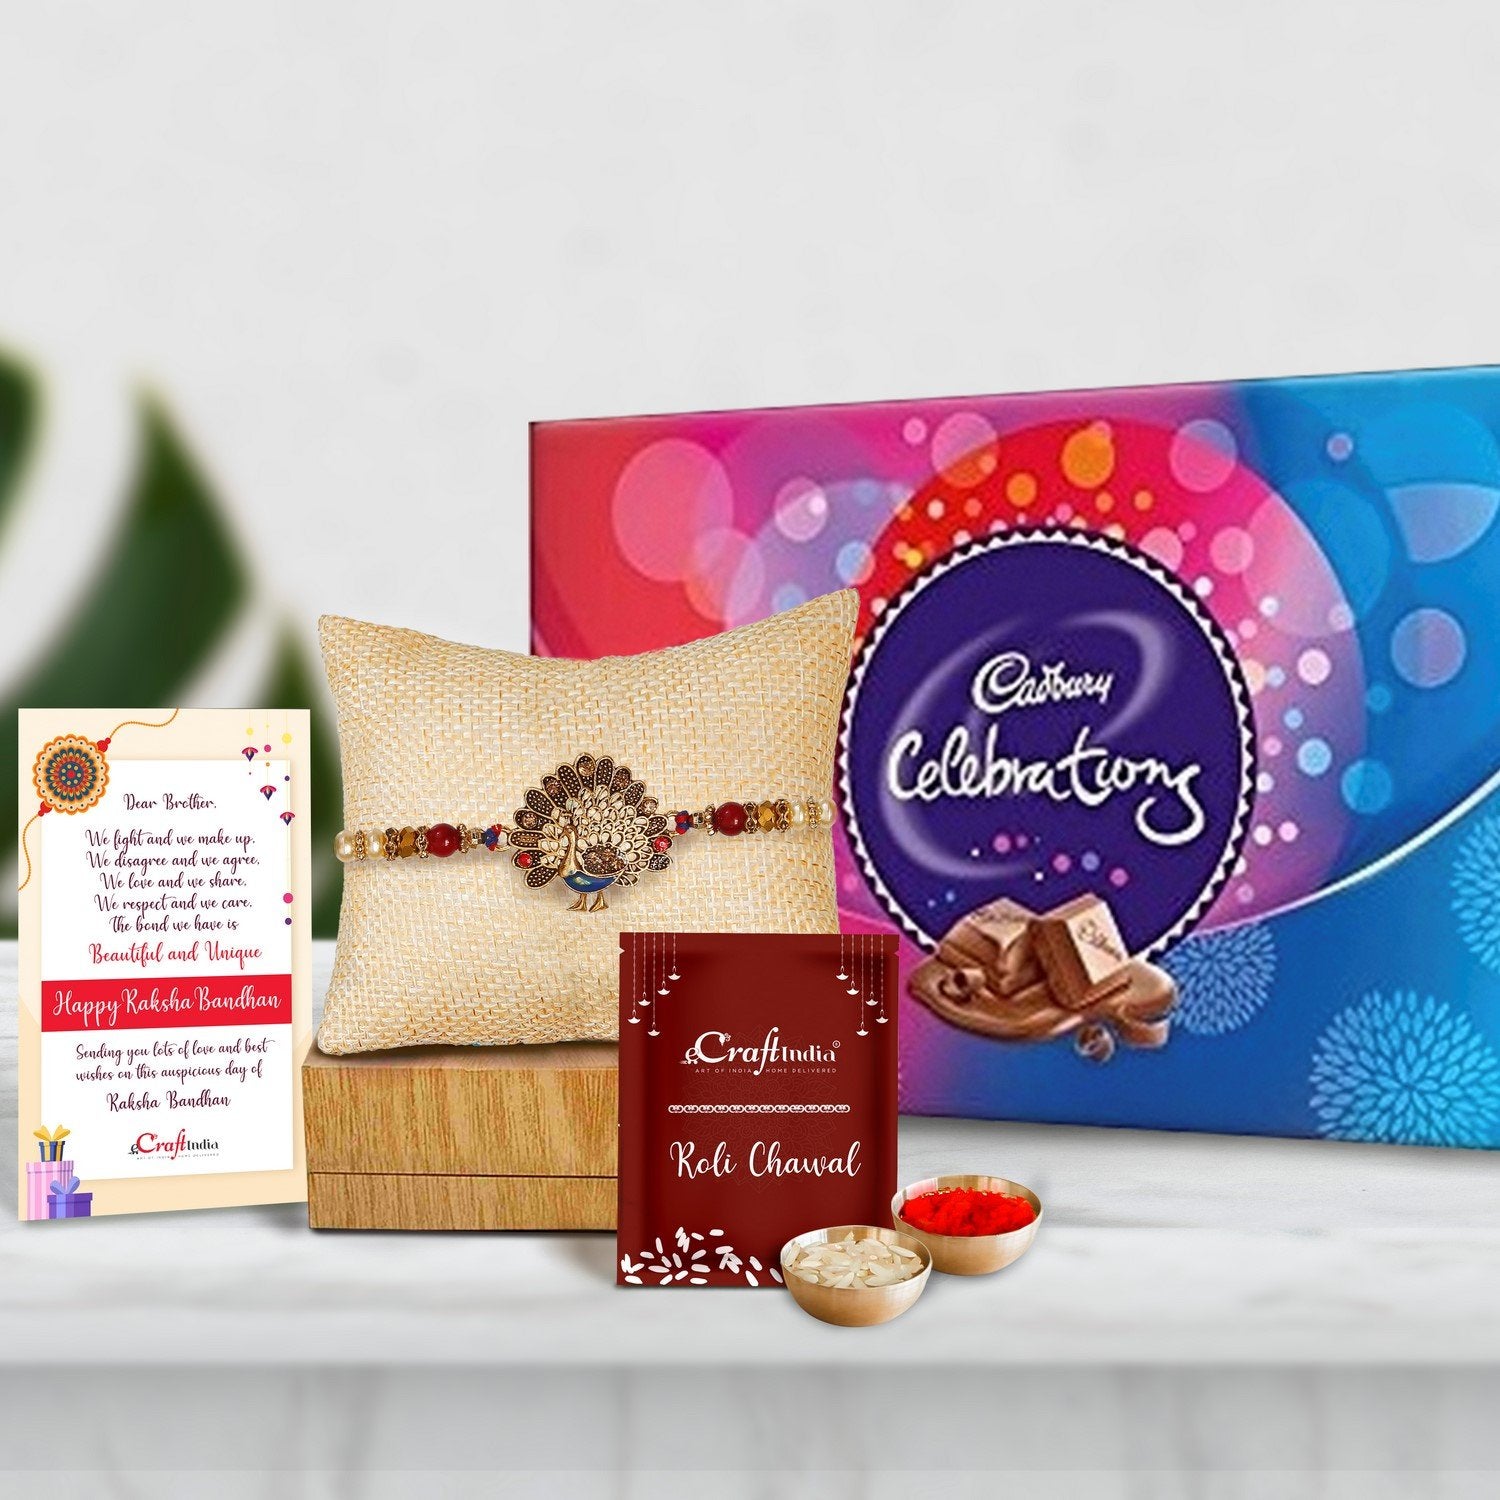 Designer Dancing Peacock Rakhi with Cadbury Celebrations Gift Pack of 7 Assorted Chocolates and Roli Chawal Pack, Best Wishes Greeting Card